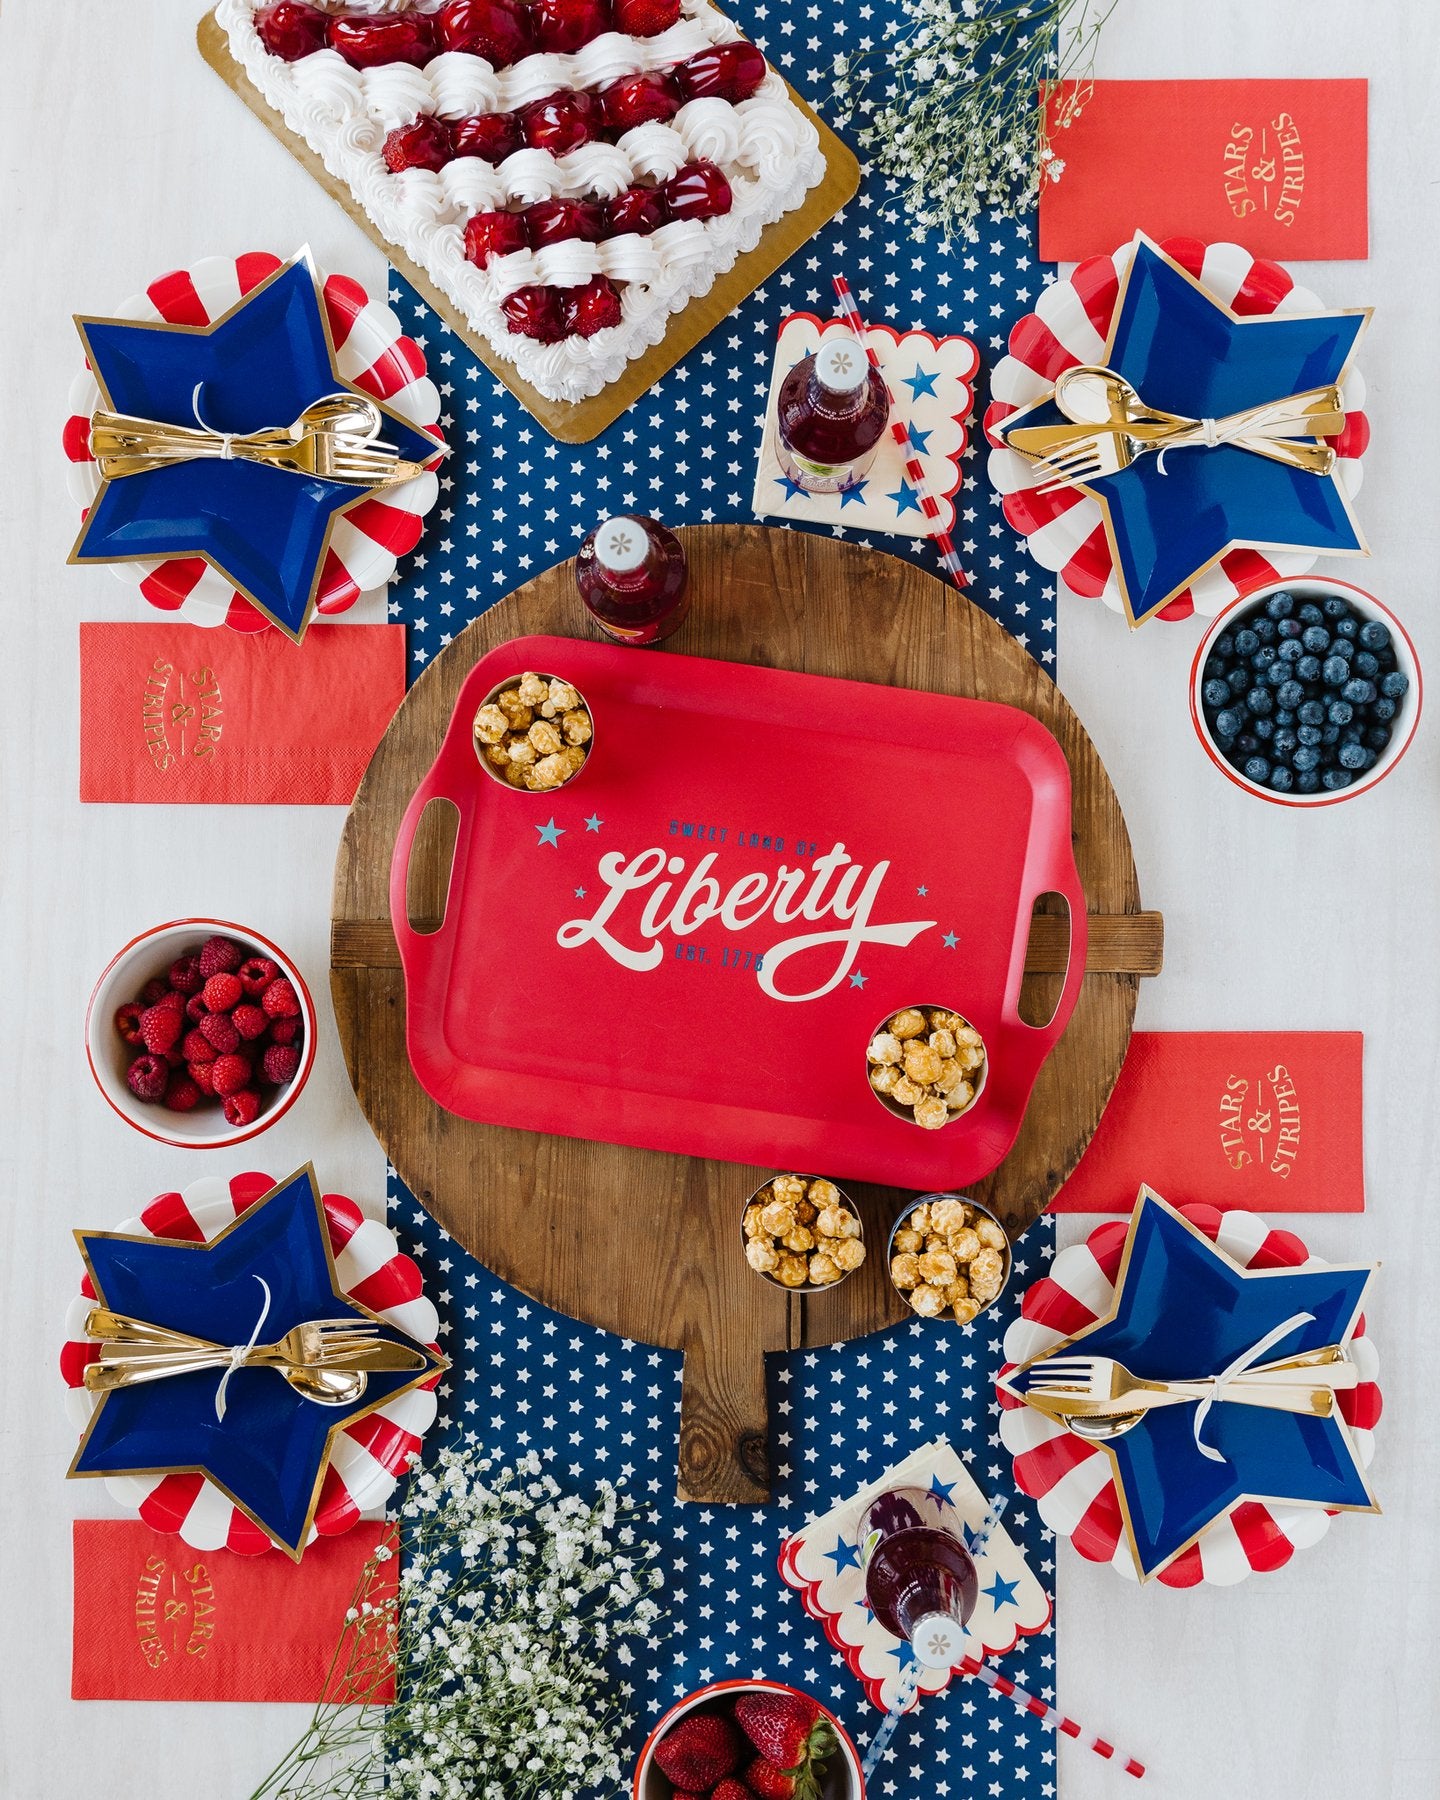 Blue Patriotic Stars Paper Table Runner | The Party Darling